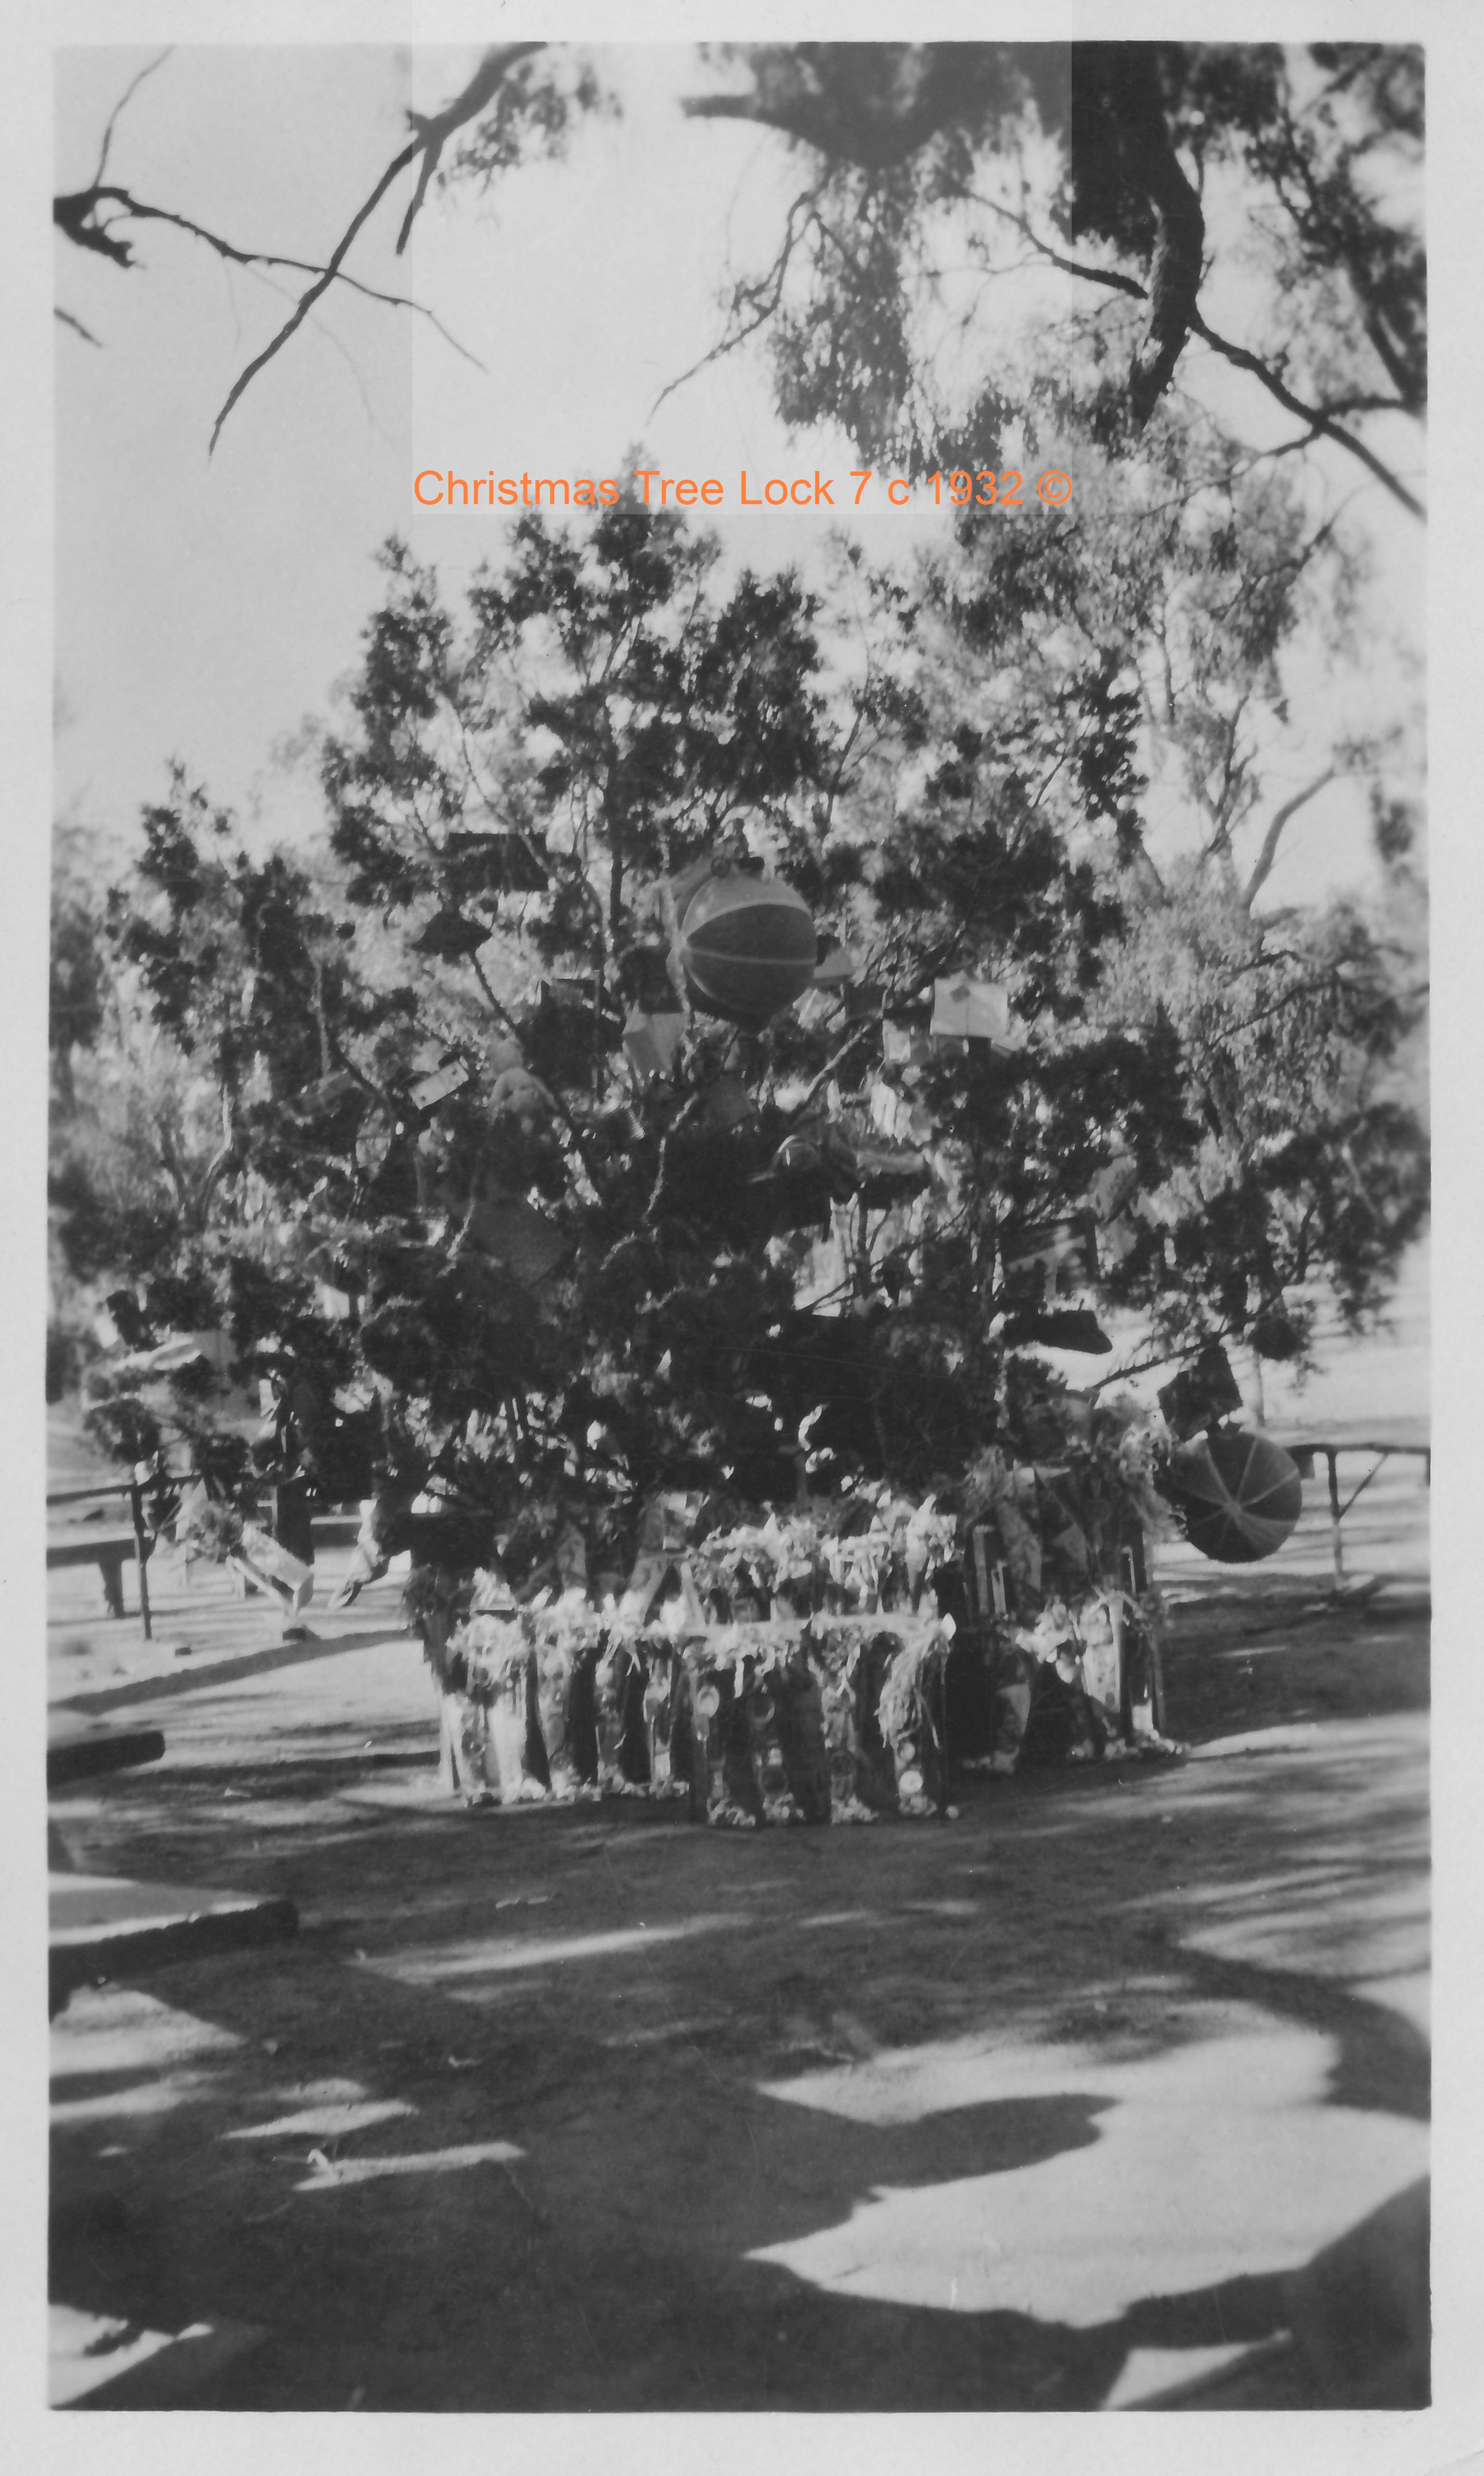 lock 7 Christmas tree from dawn glenn collection